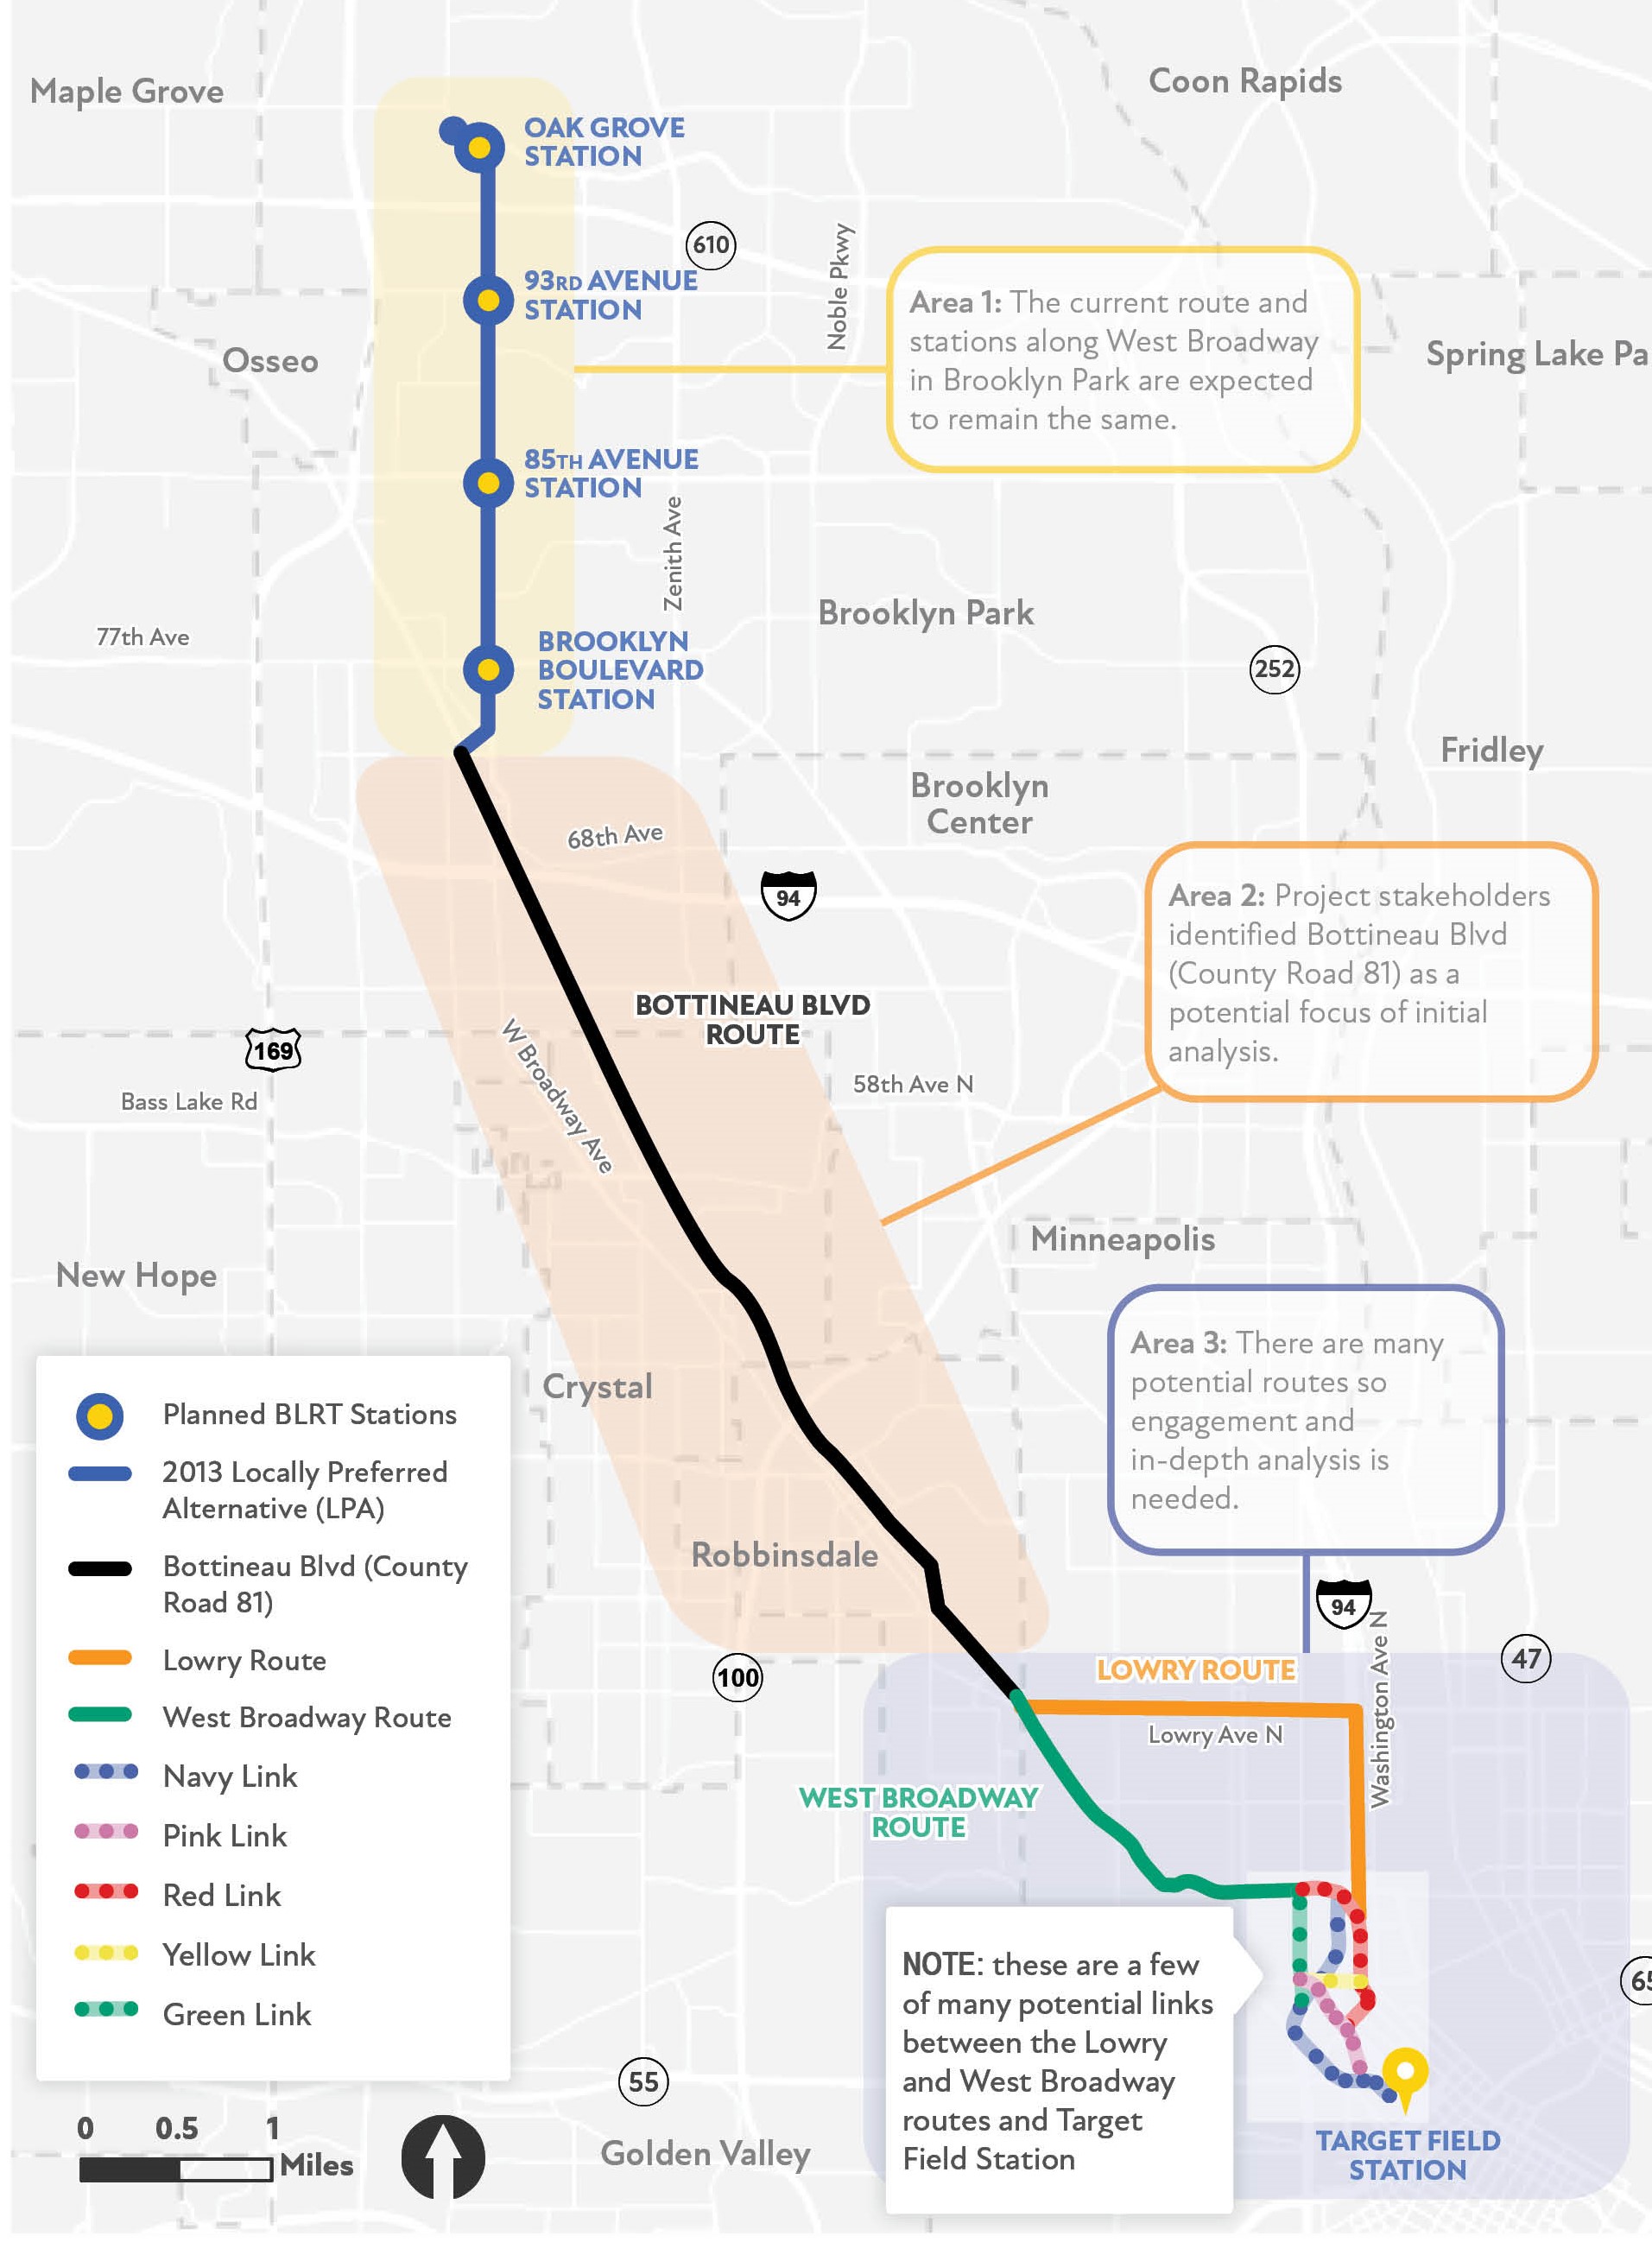 Illustration of route options between Brooklyn Park and Minneapolis. The four northern stations are likely to remain the same as the previous route. It connects to Bottineau Boulevard, and then shows two main options at the southern end, with five additional options to reach Target Field.